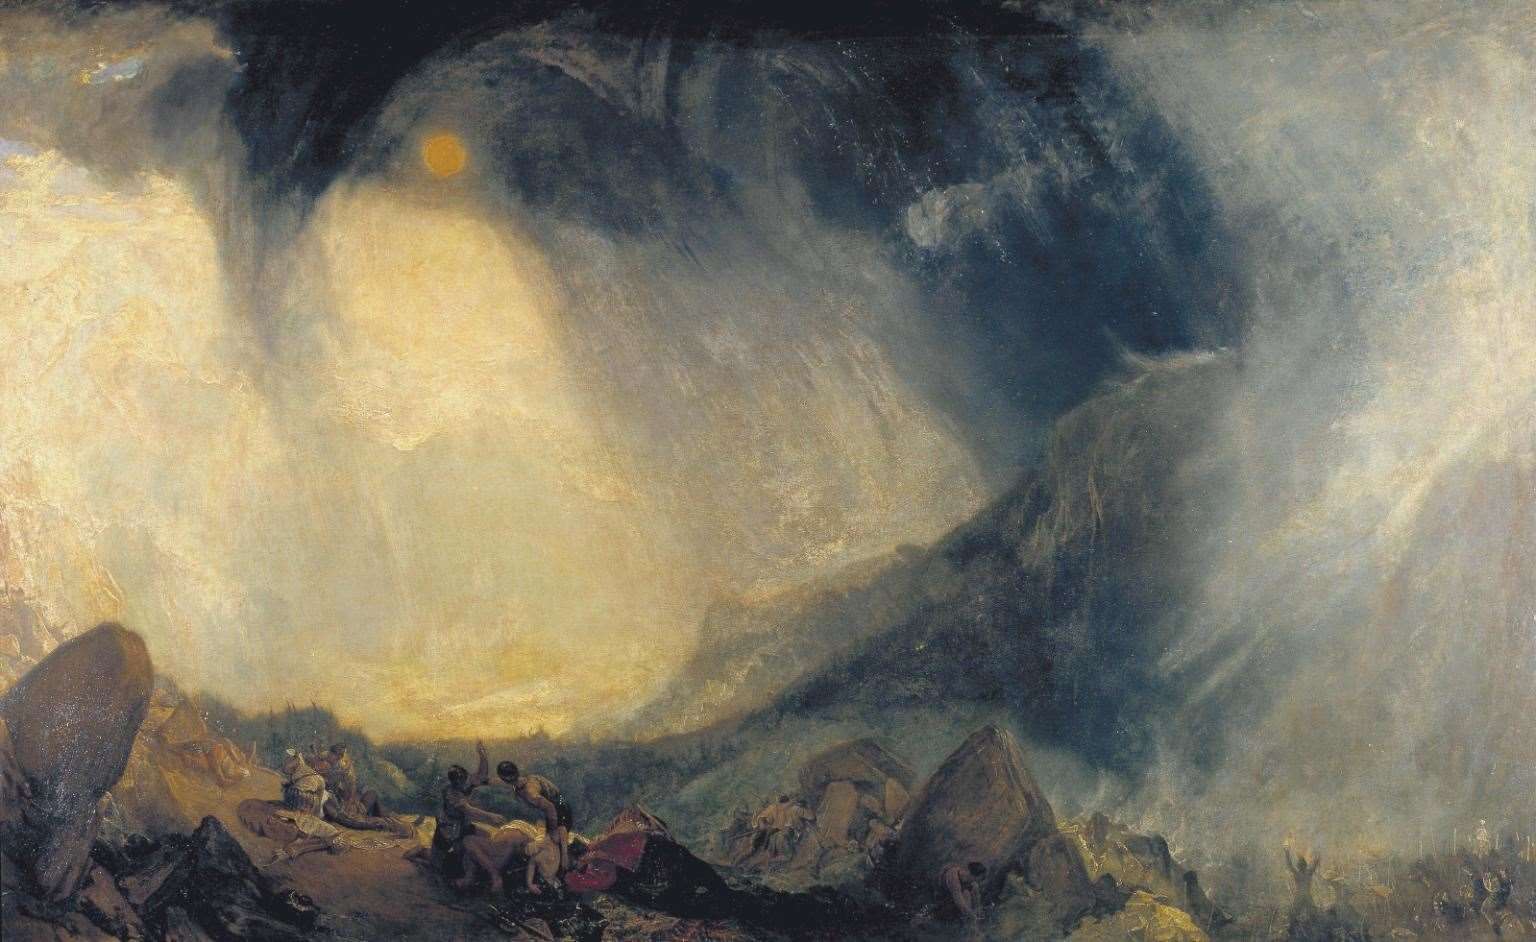 Snow Storm: Hannibal and his Army Crossing the Alps exhibited 1812 by JMW Turner. Picture: tate.org.uk/art/work/N00490